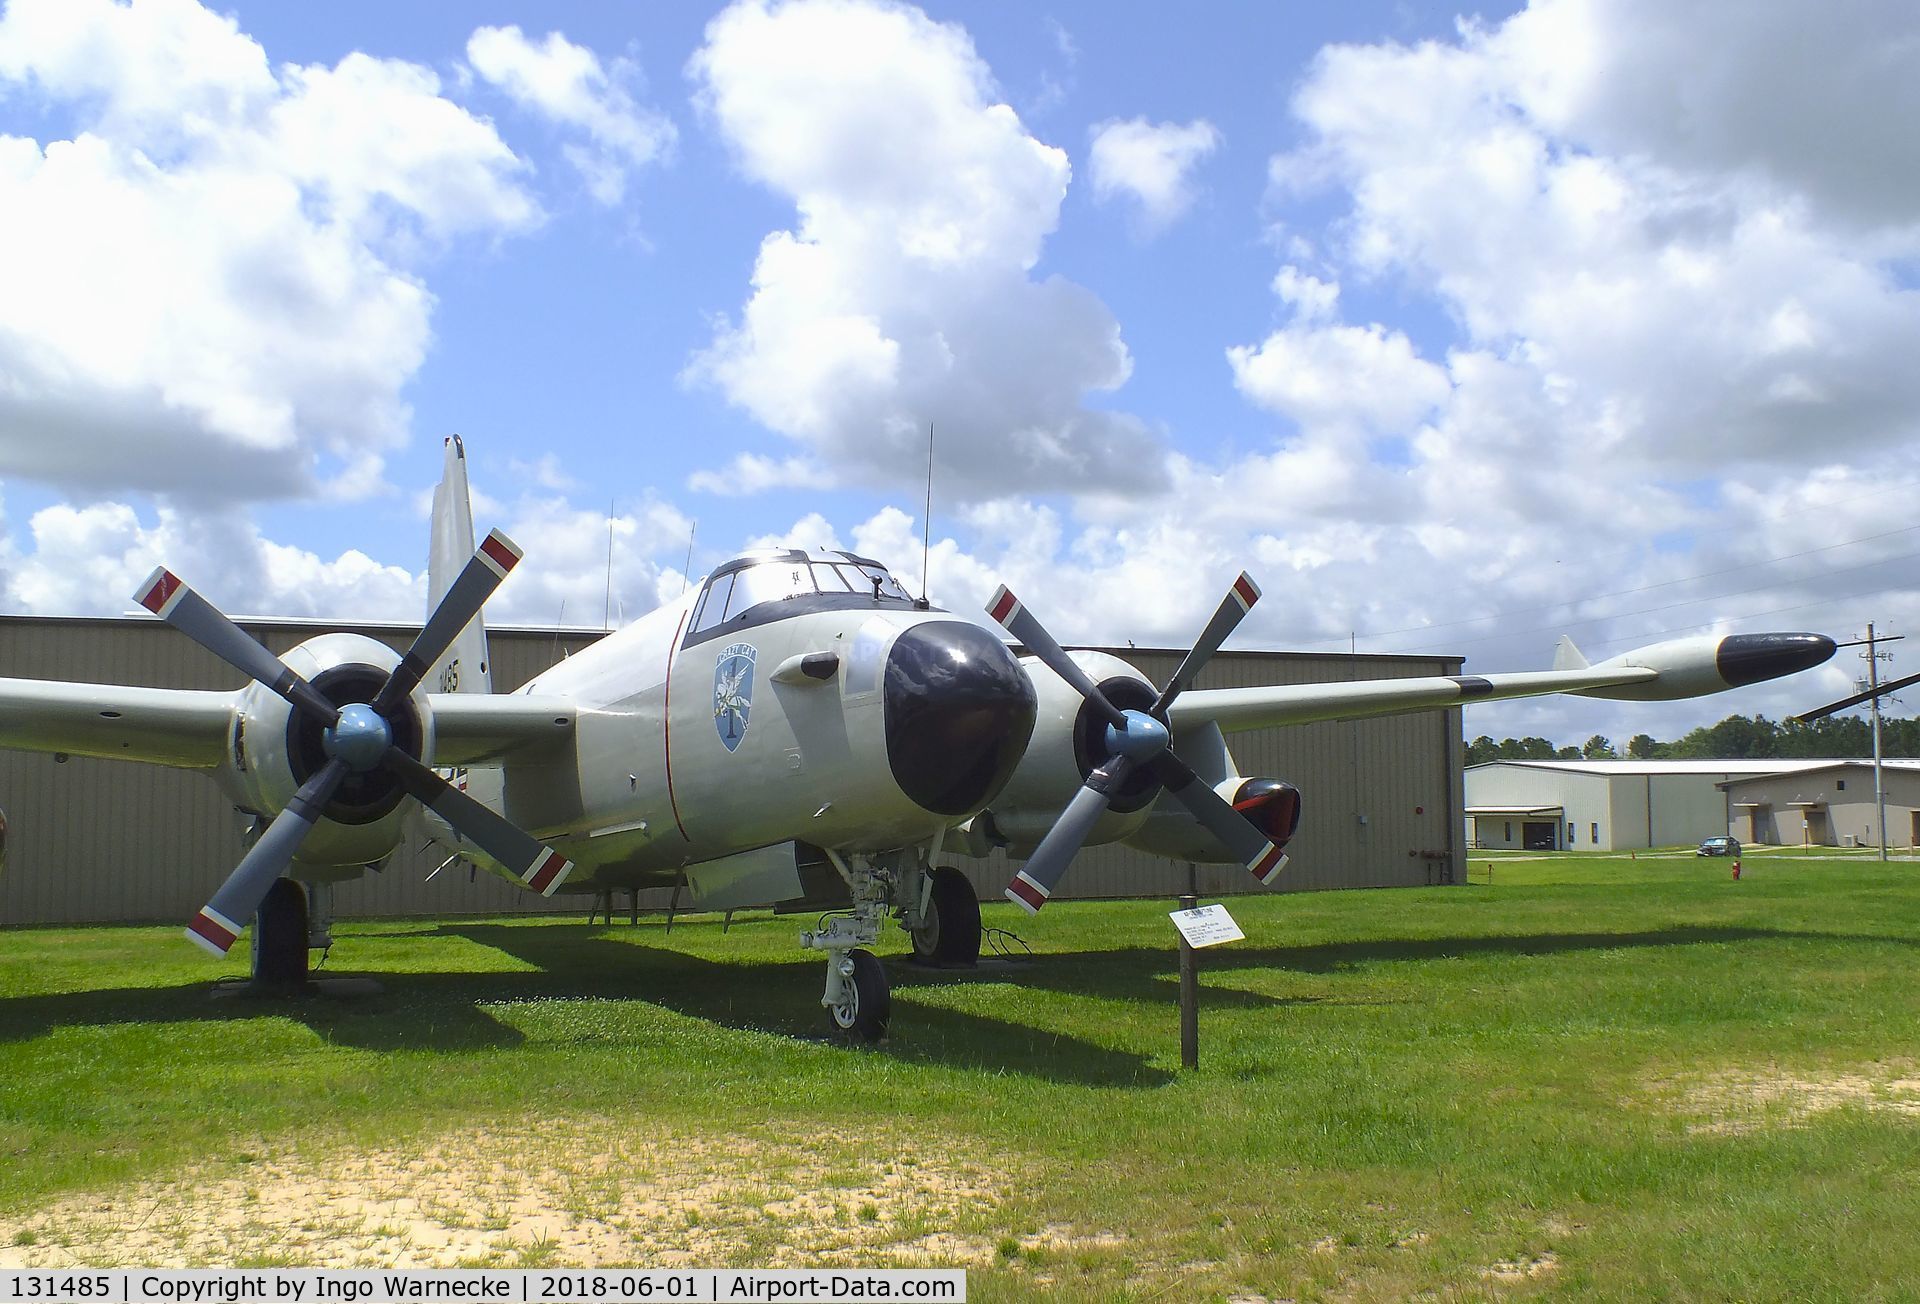 131485, Lockheed AP-2E Neptune C/N 426-5366, Lockheed AP-2E Neptune at the US Army Aviation Museum, Ft. Rucker AL